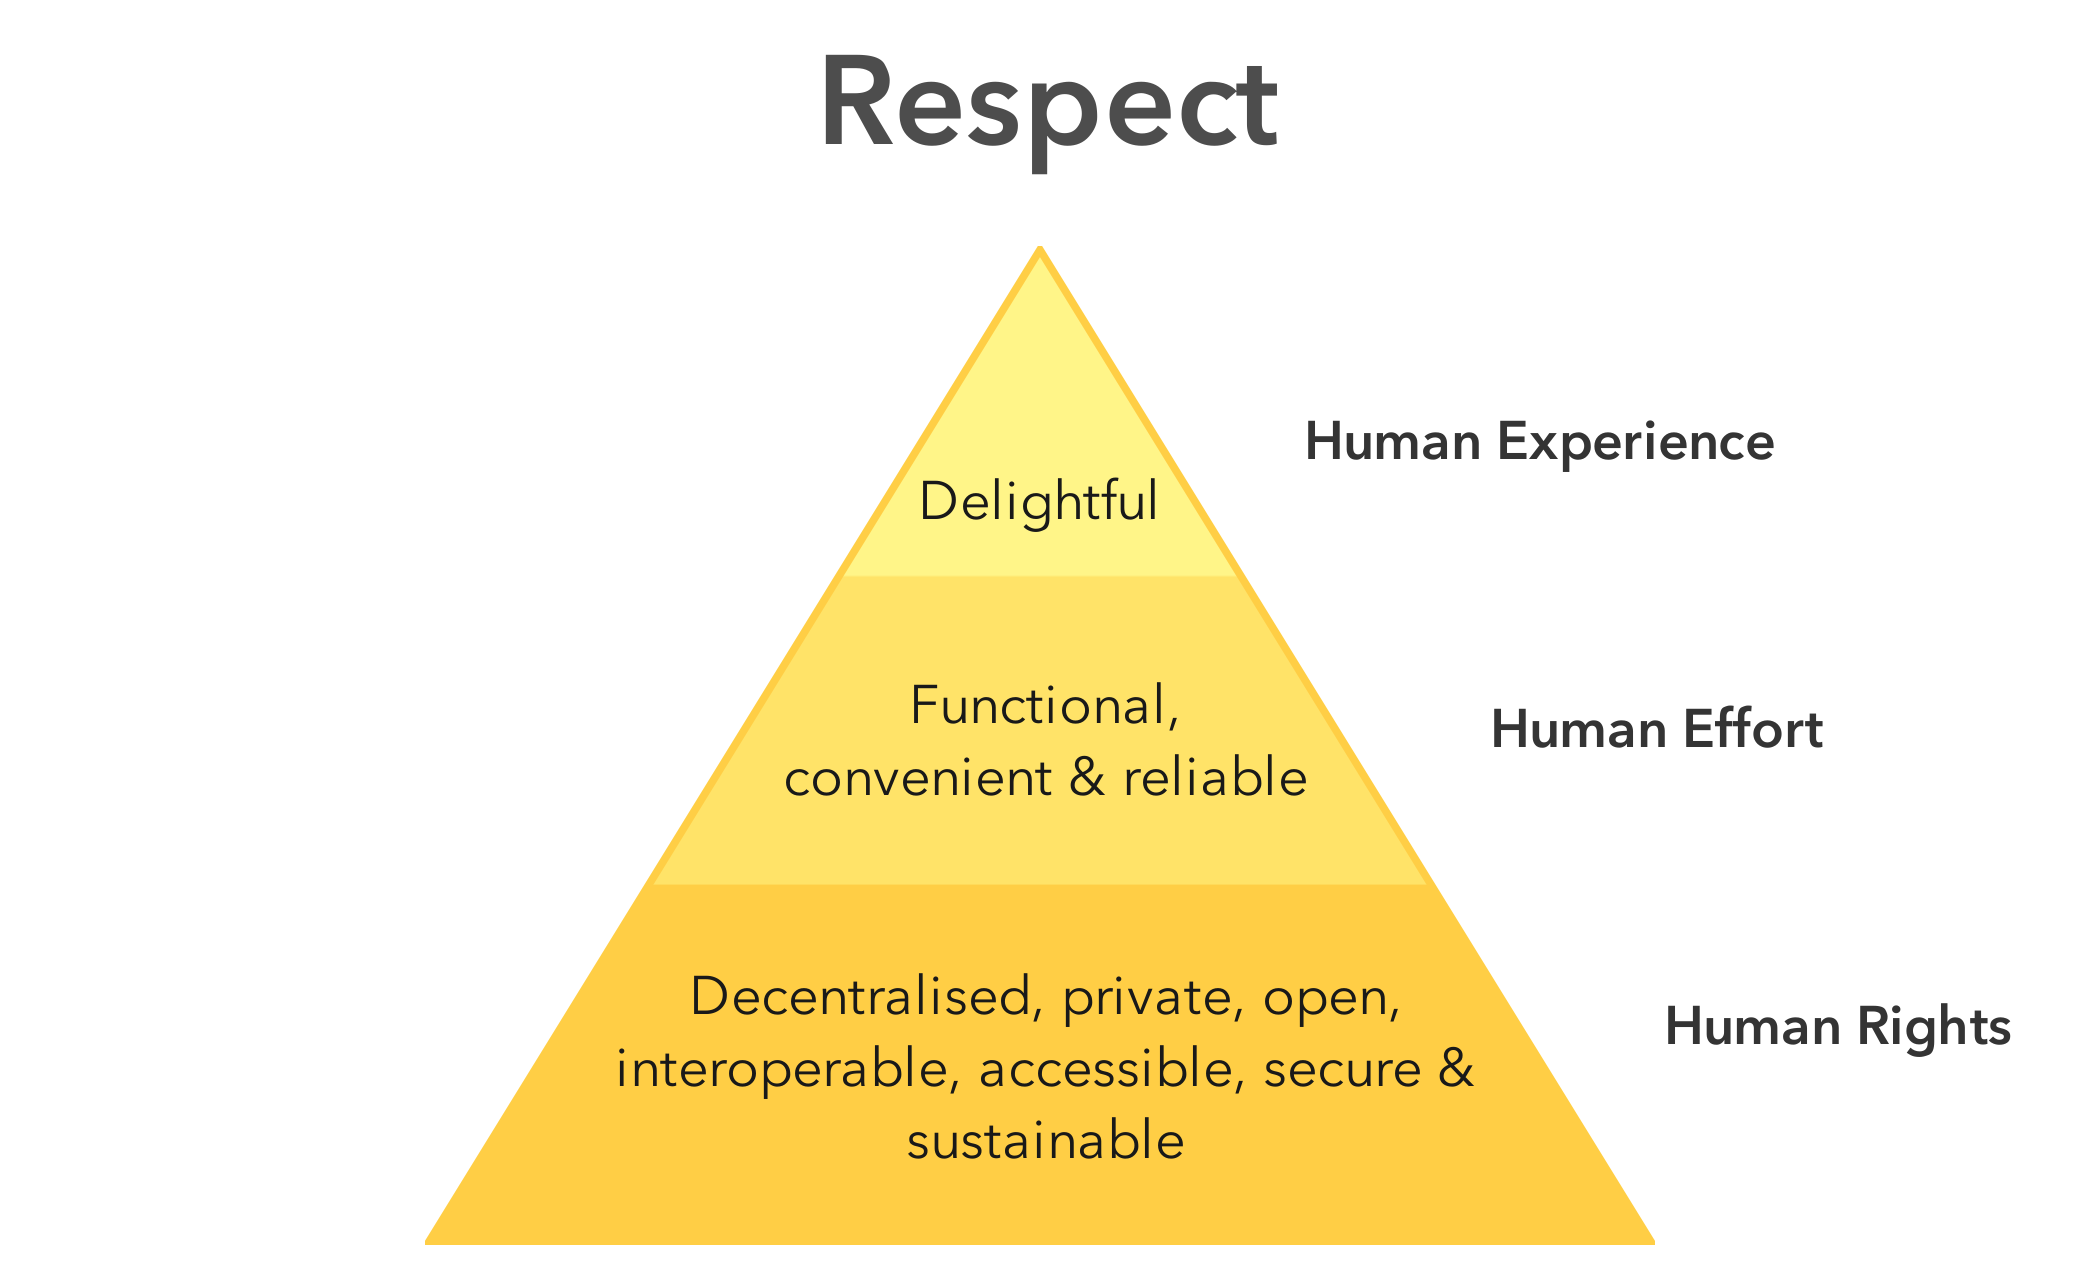 Ethical design hierarchy: respect for human rights, effort, and experience